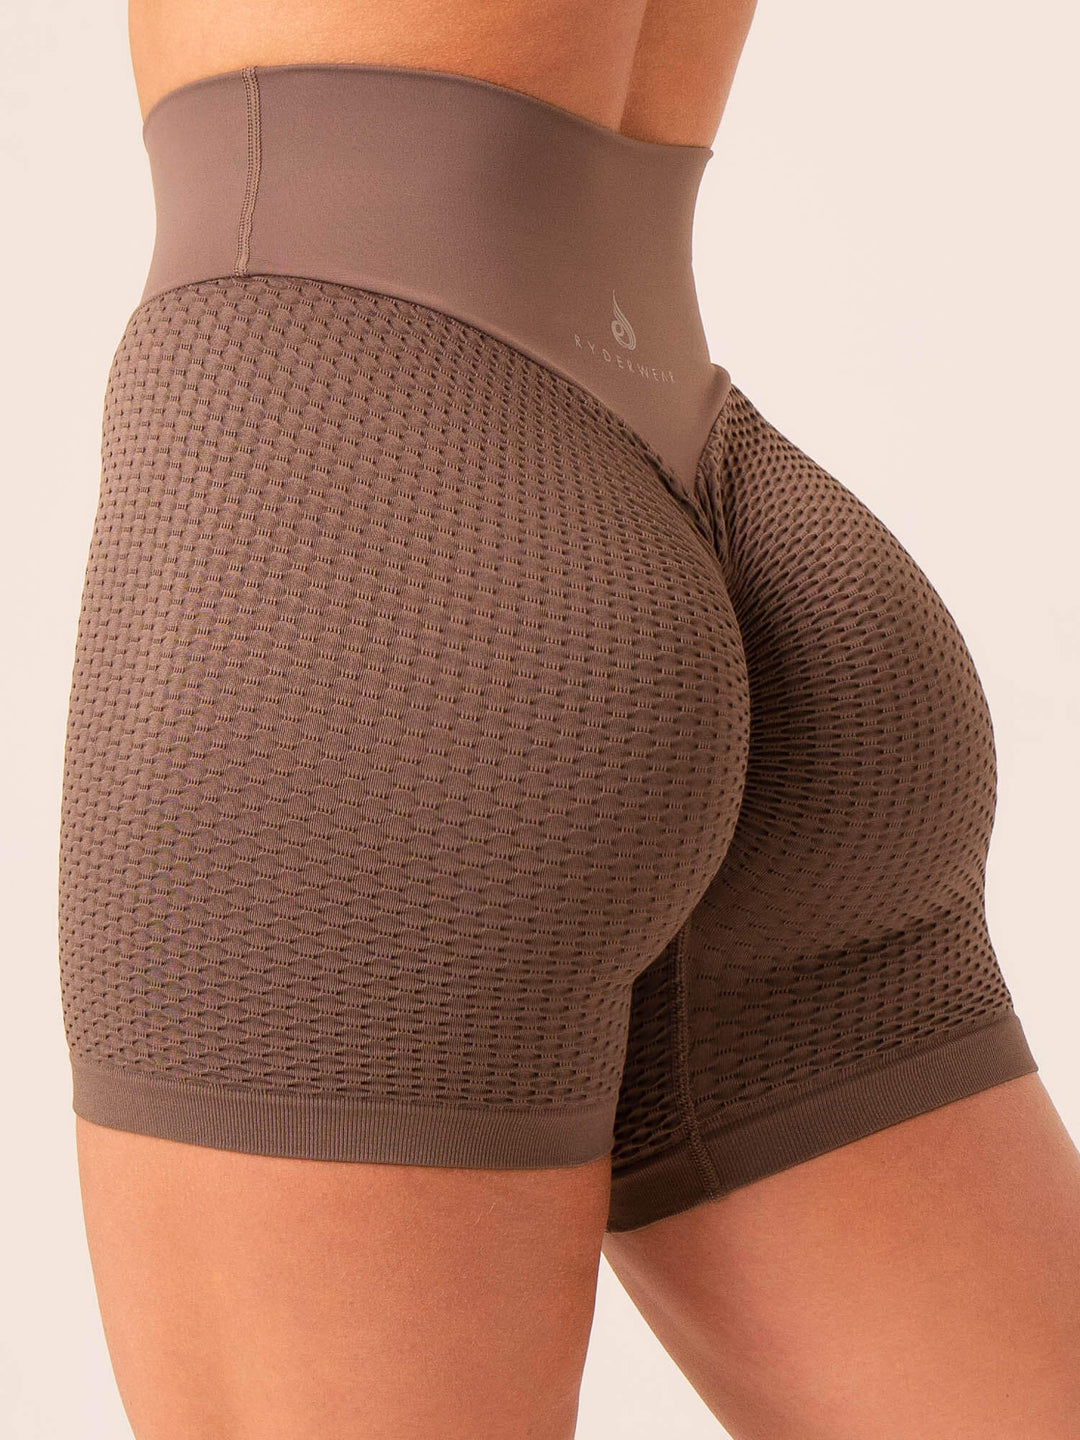 Honeycomb Scrunch Seamless Shorts - Taupe Clothing Ryderwear 